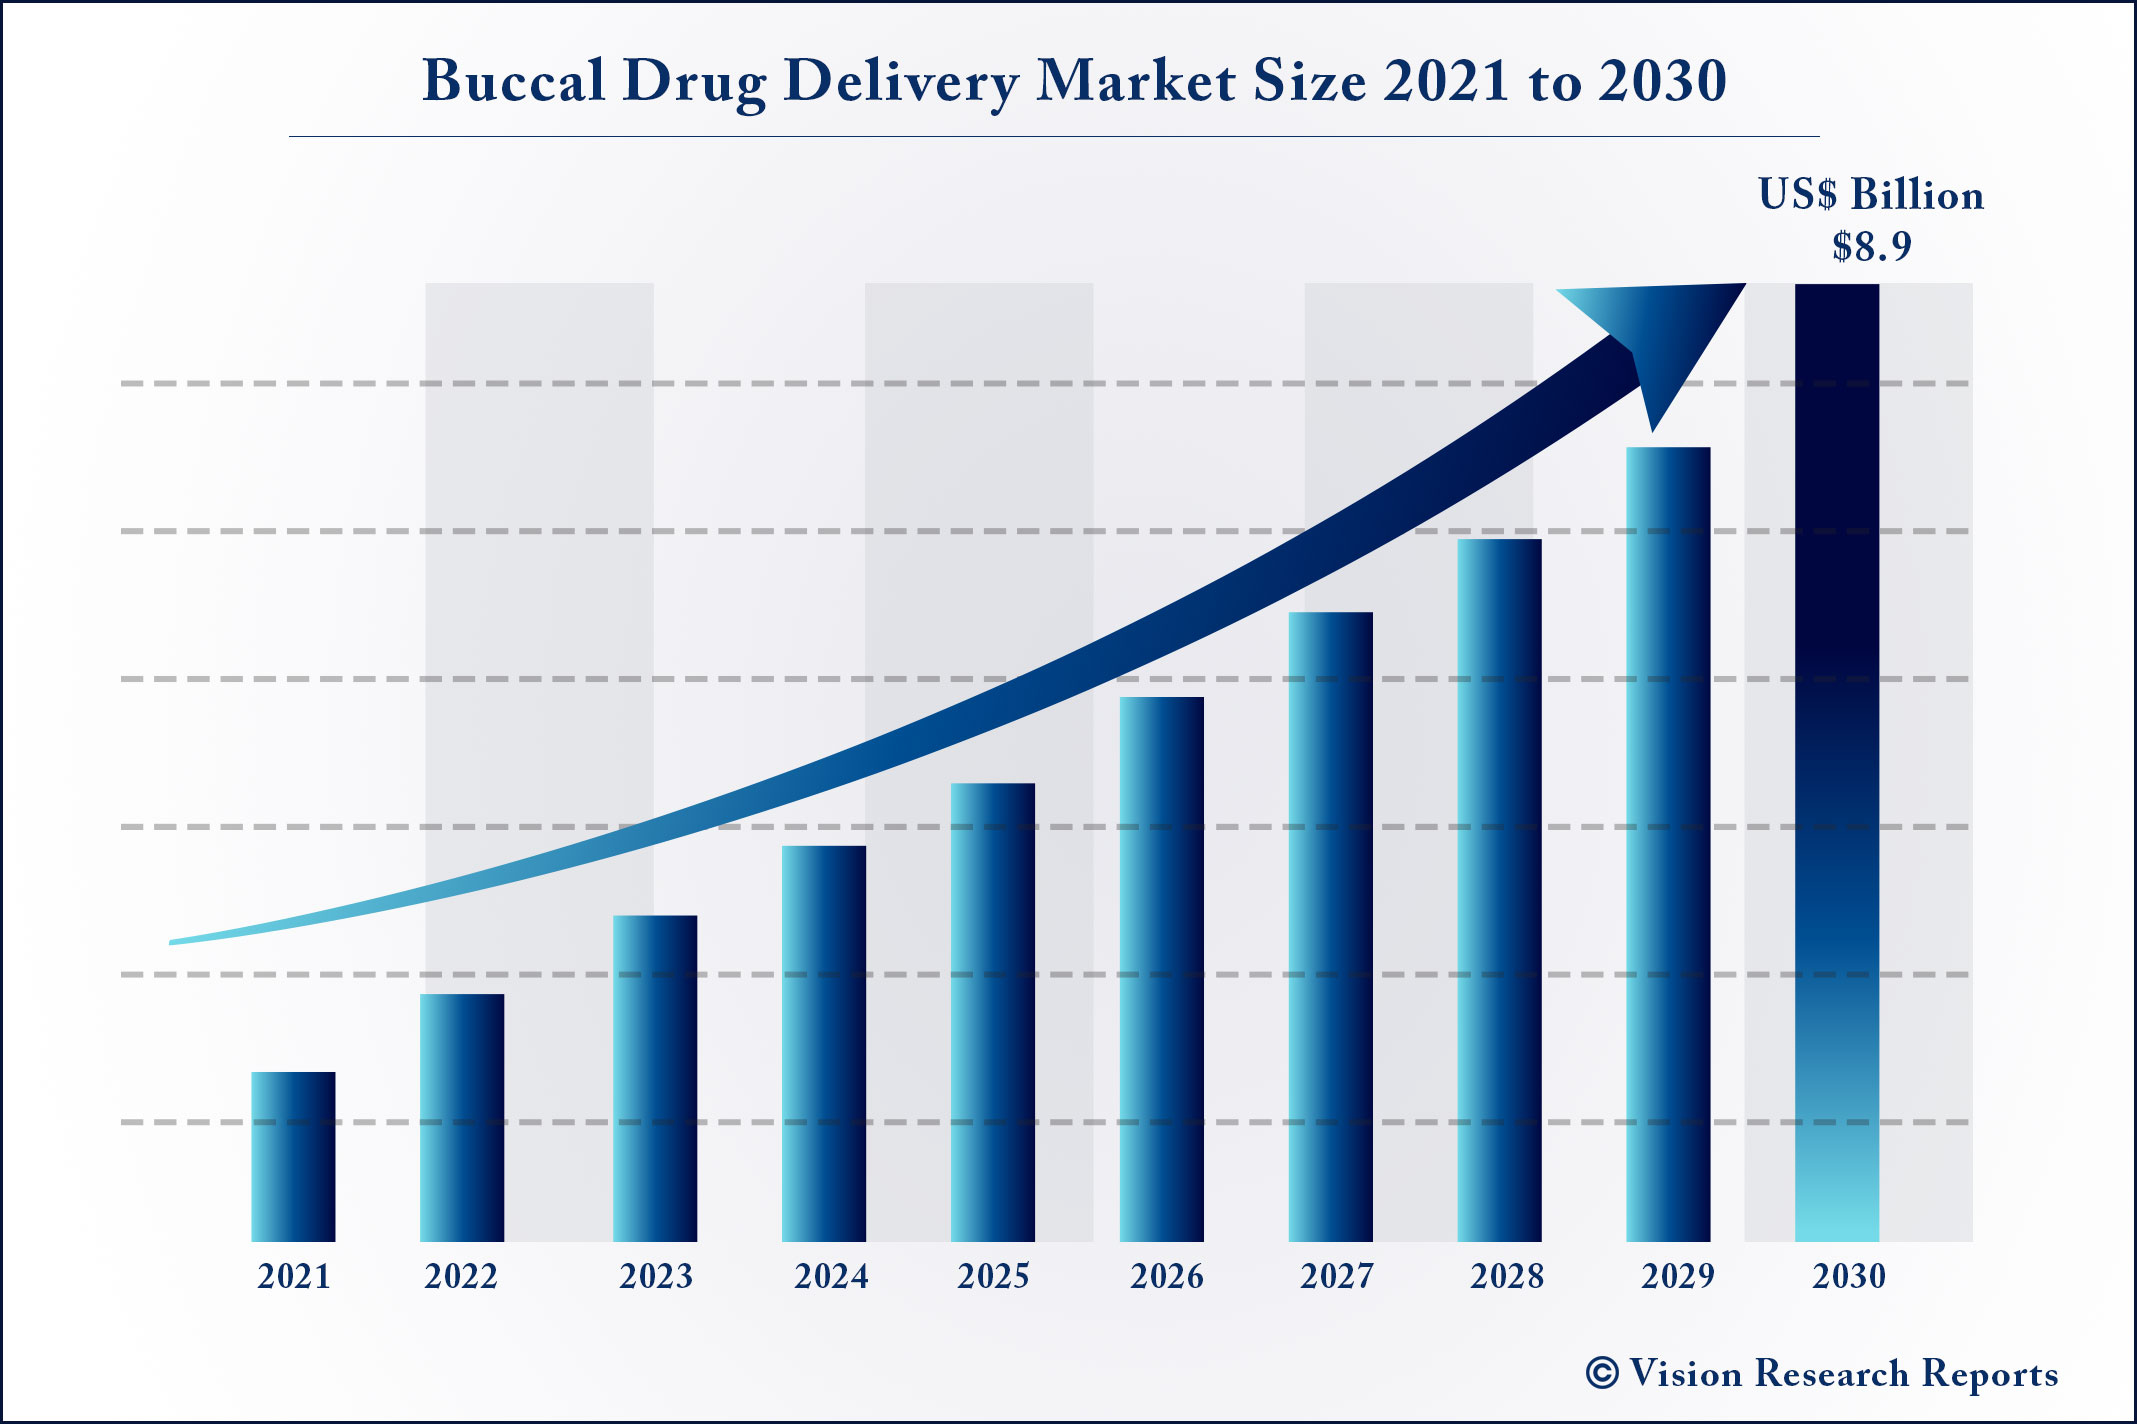 Buccal Drug Delivery Market Size 2021 to 2030